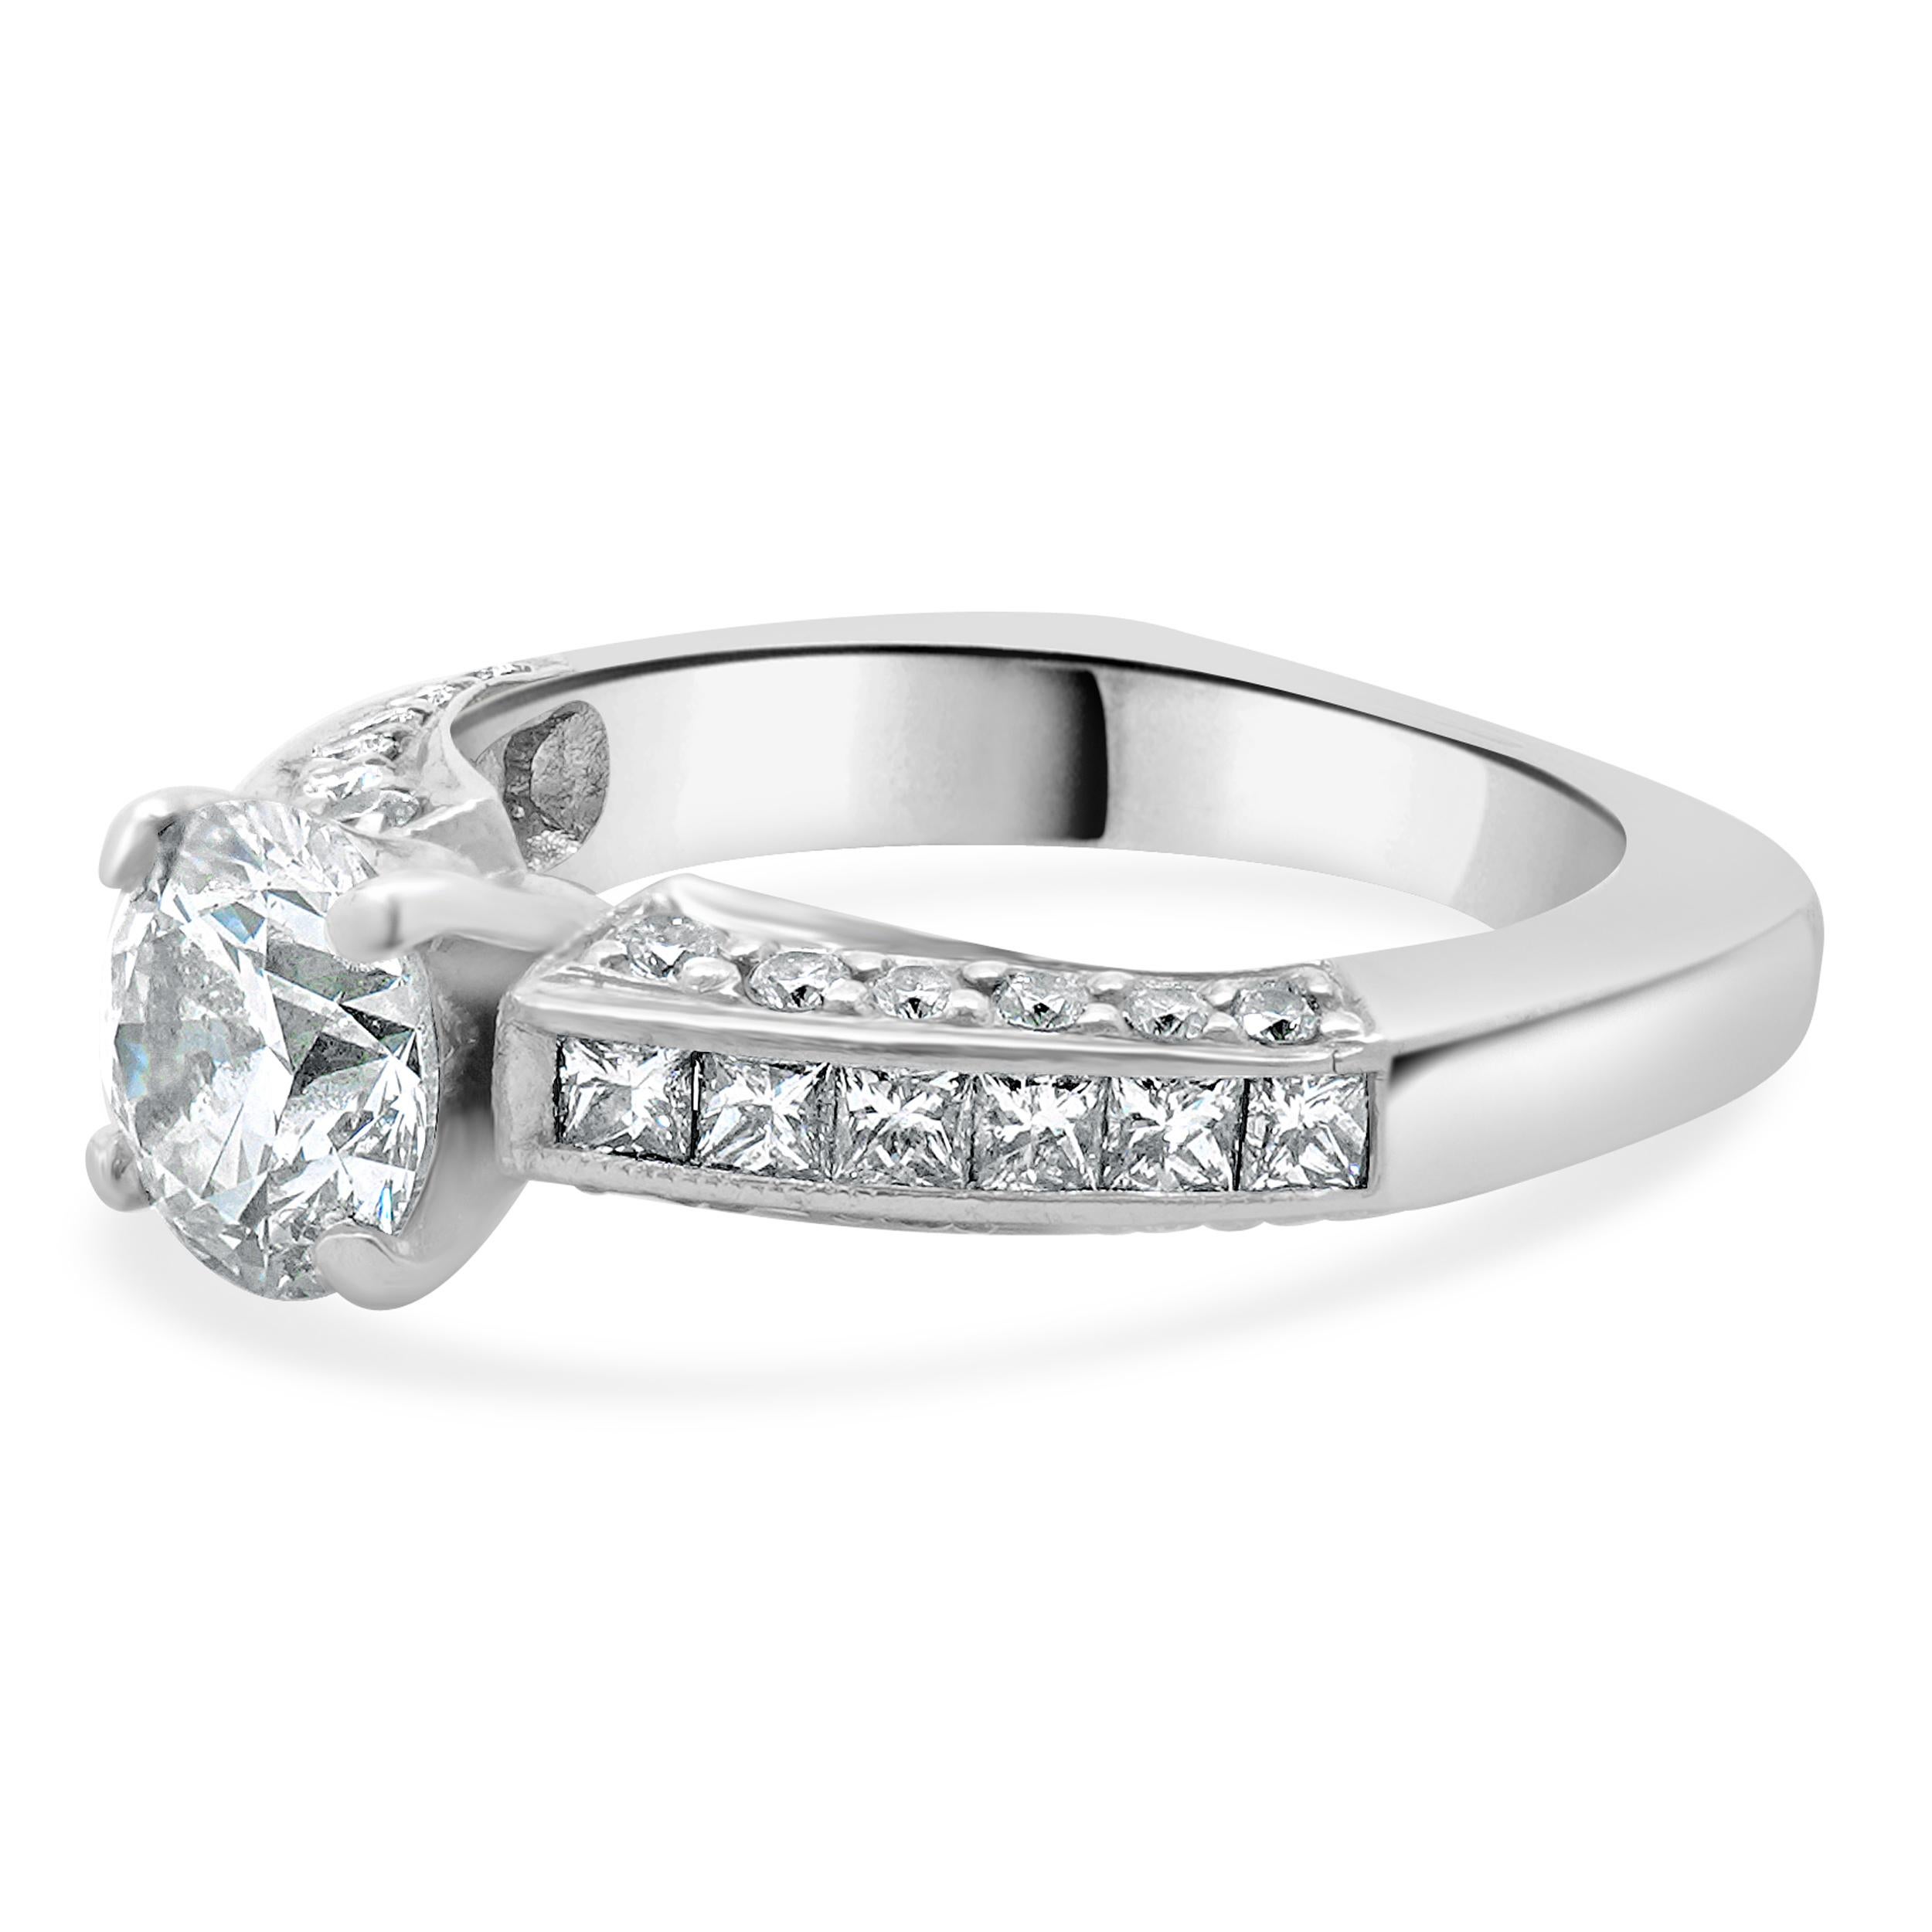 Designer: custom design
Material: platinum
Center Diamond: 1 round brilliant cut = 1.27ct
Color : G
Clarity : SI1
Diamond: 36 round and princess cut = 0.72cttw
Color : G / H
Clarity : SI1-2
Dimensions: ring top measures 4.7mm
Size: 5.5 complimentary